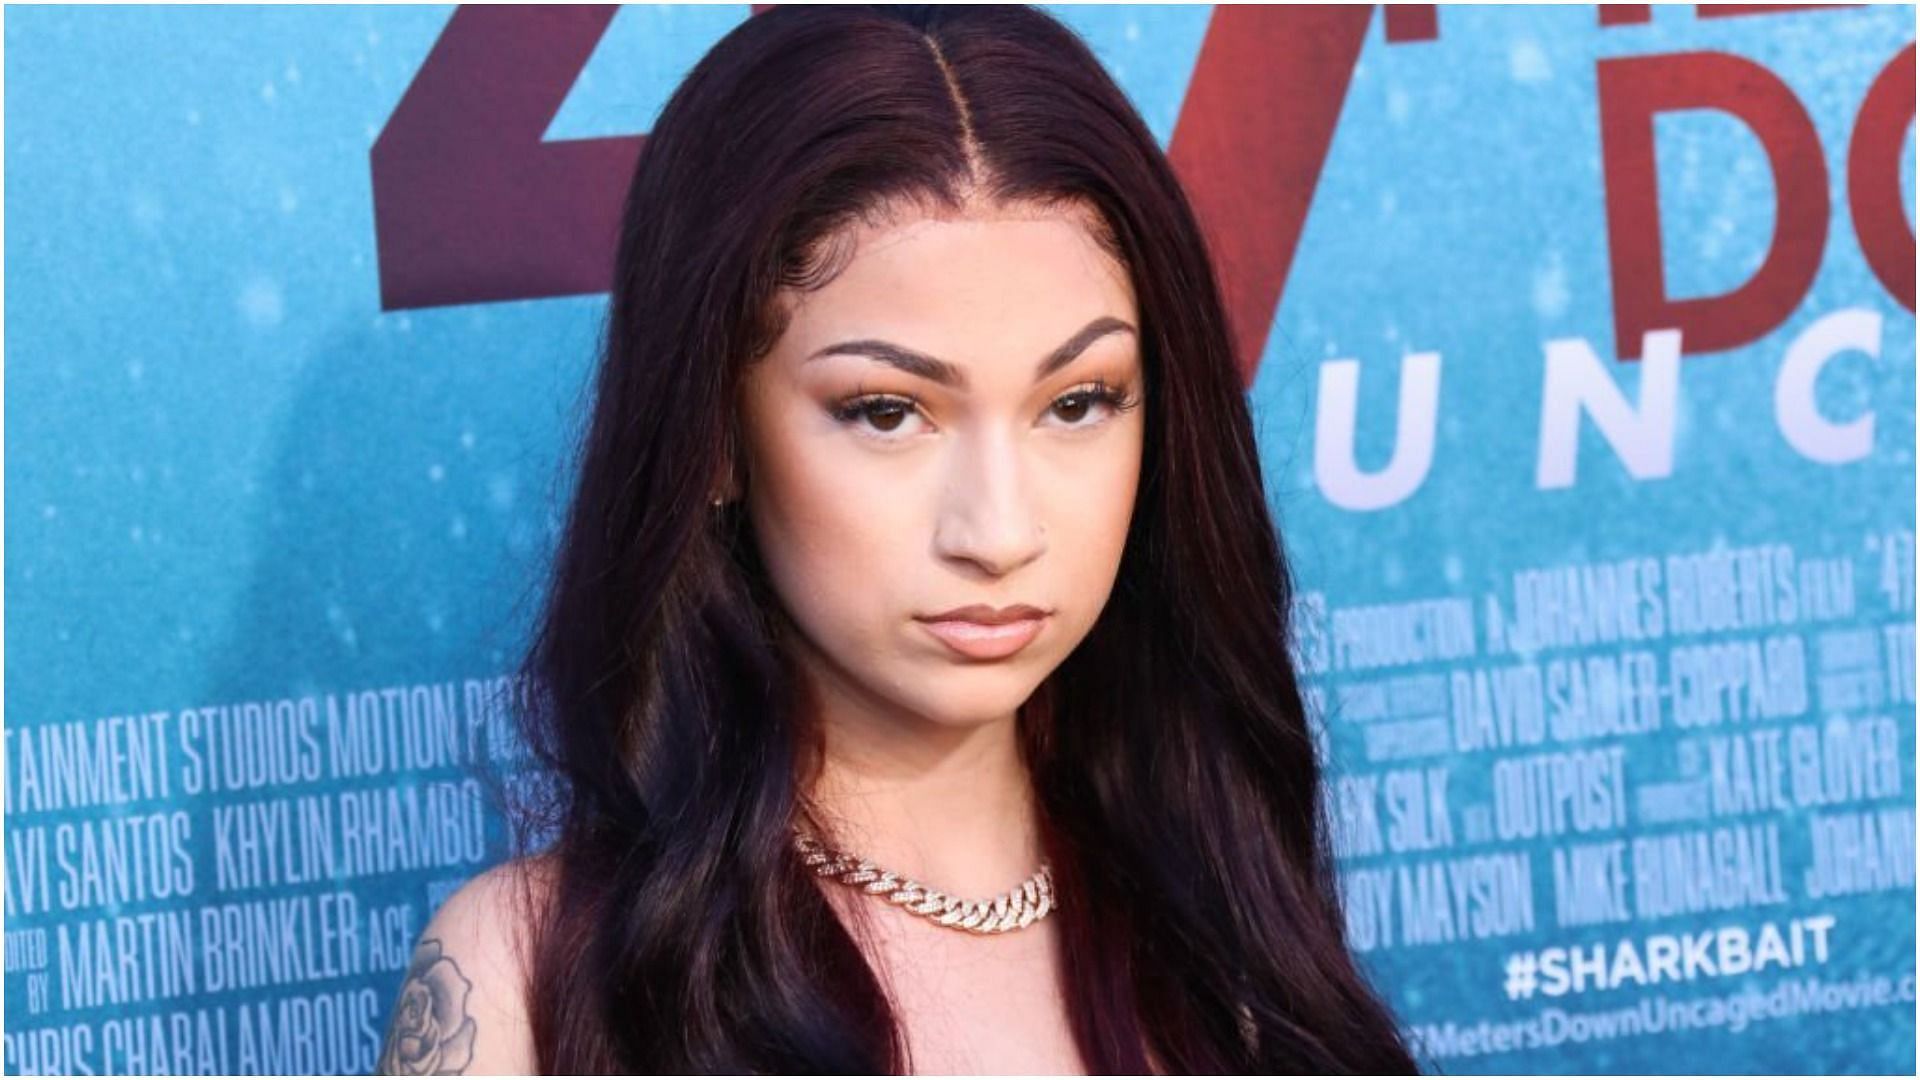 Bhad Bhabie paid $6.1 million in cash for a house in Florida (Image via Paul Archuleta/Getty Images)